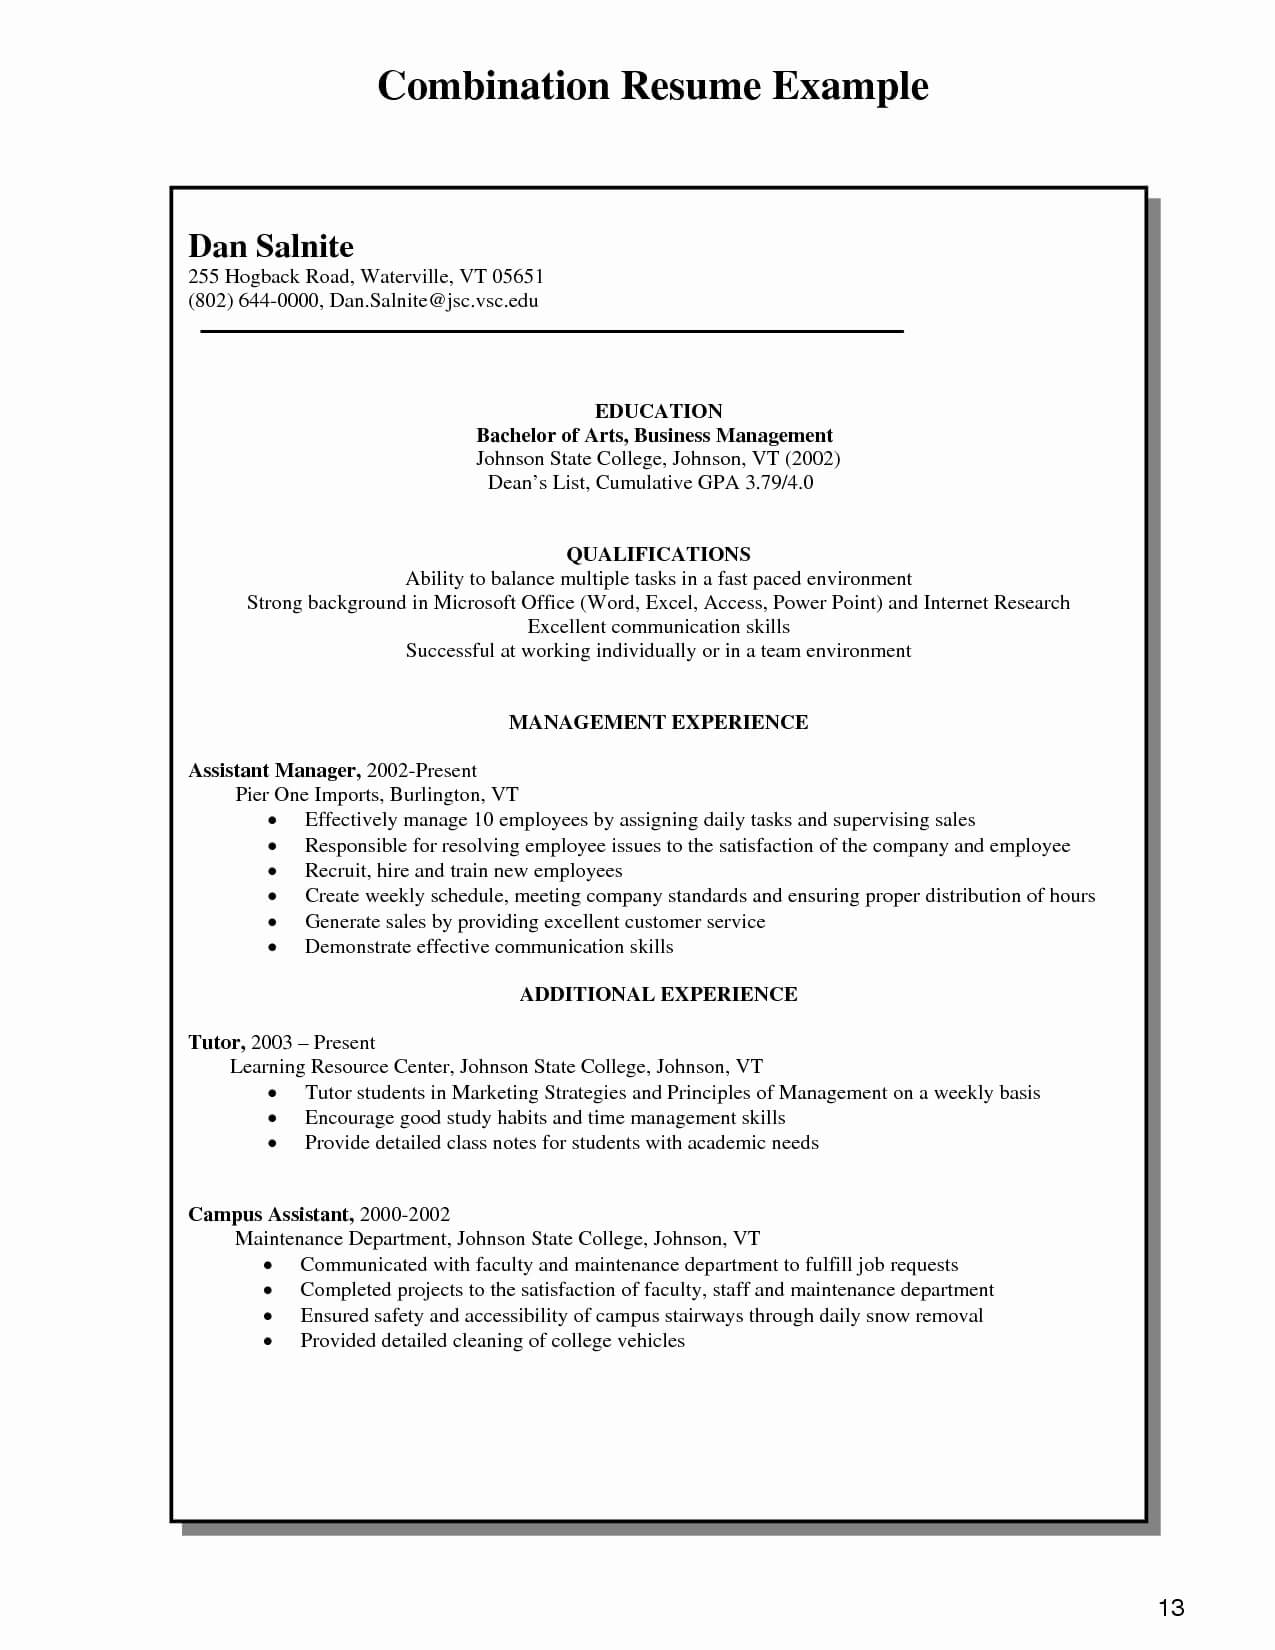 041 Combination Resume Template Free Awesome Bination Of In Combination Resume Template Word